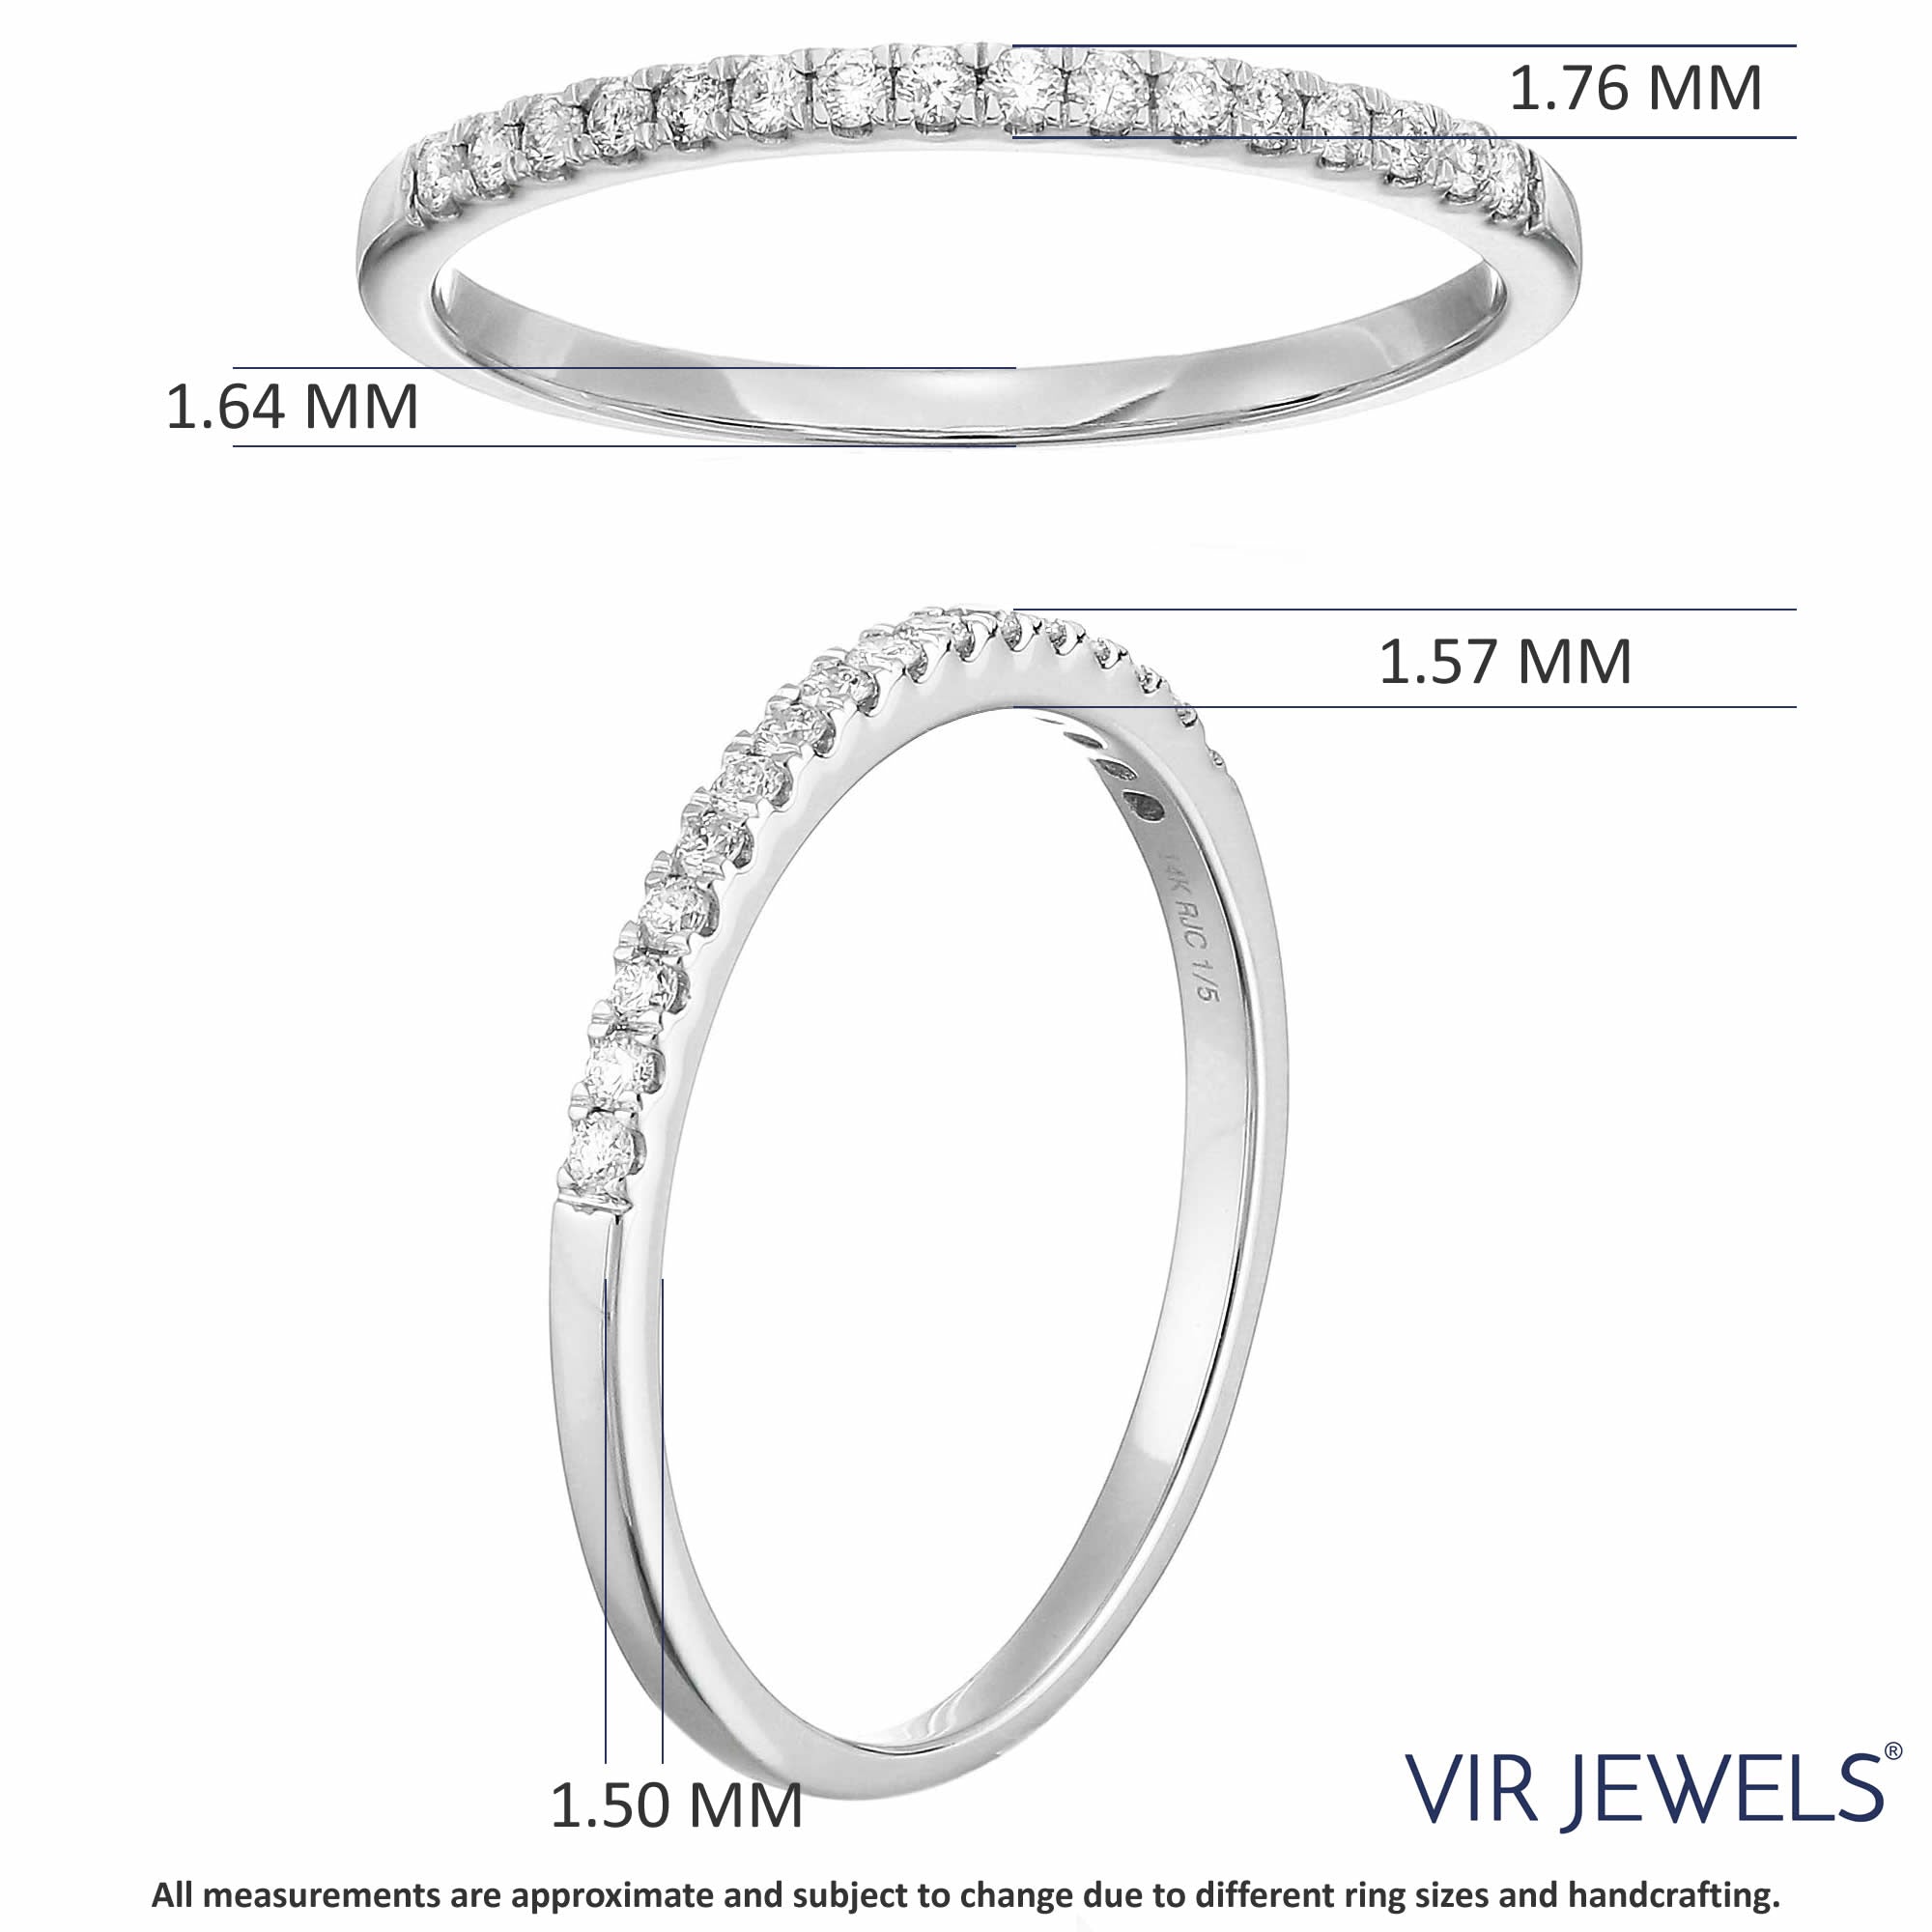 1/5 cttw Round Diamond Wedding Band for Women in 14K White Gold Prong Set, Size 4.5-10